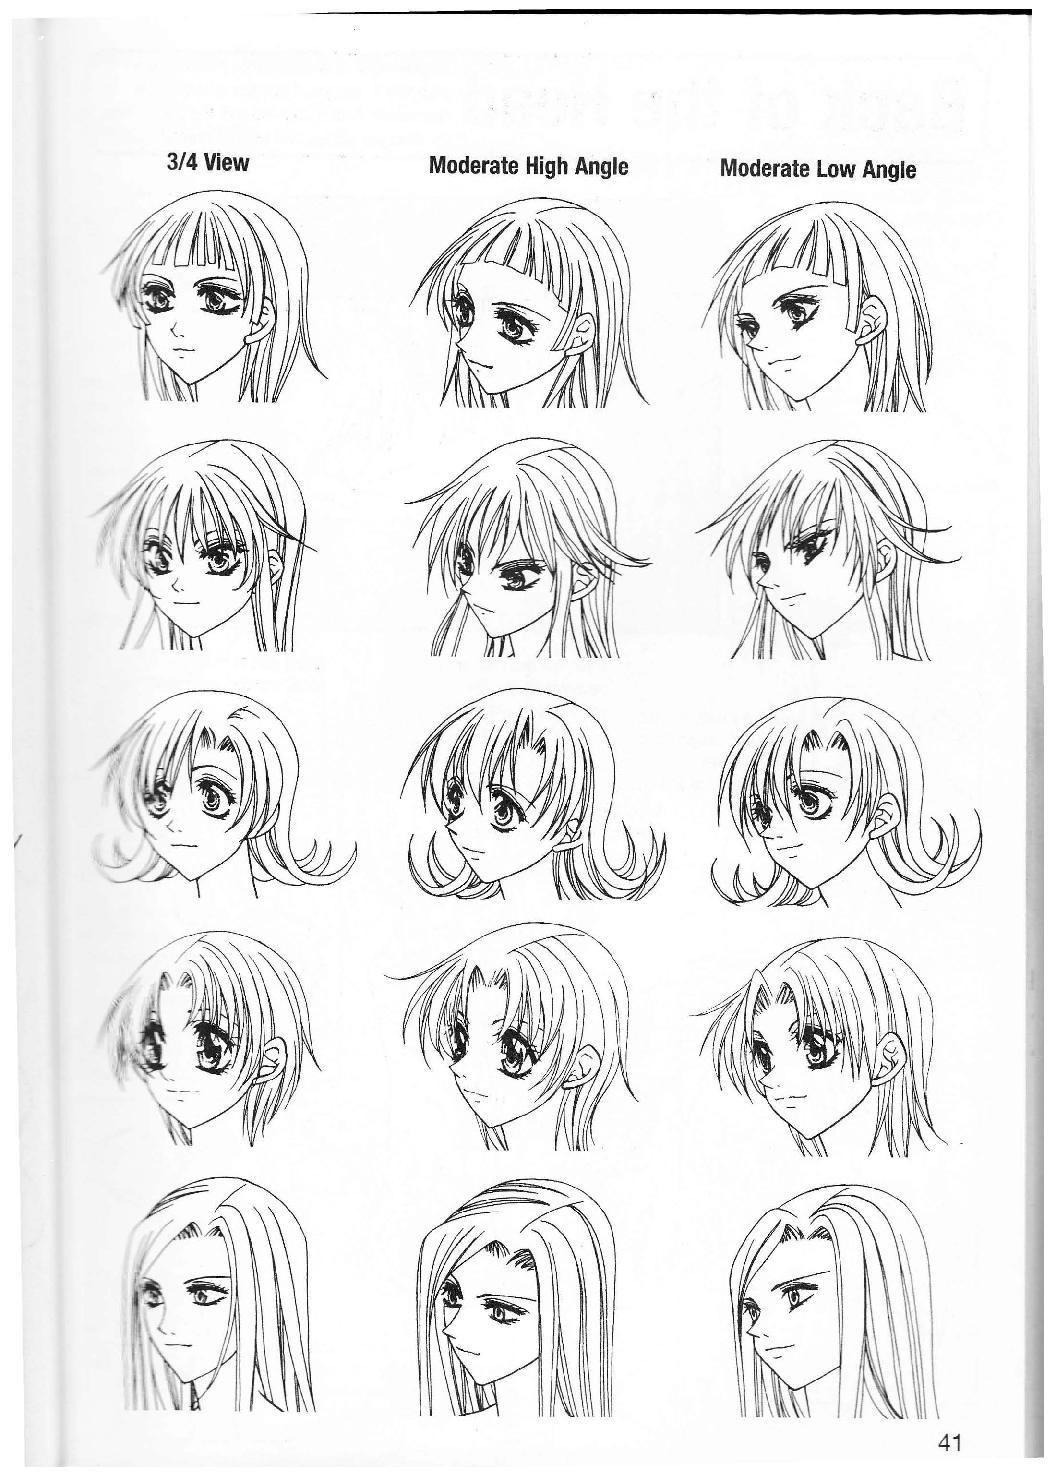 More How to Draw Manga Vol. 2 - Penning Characters 42